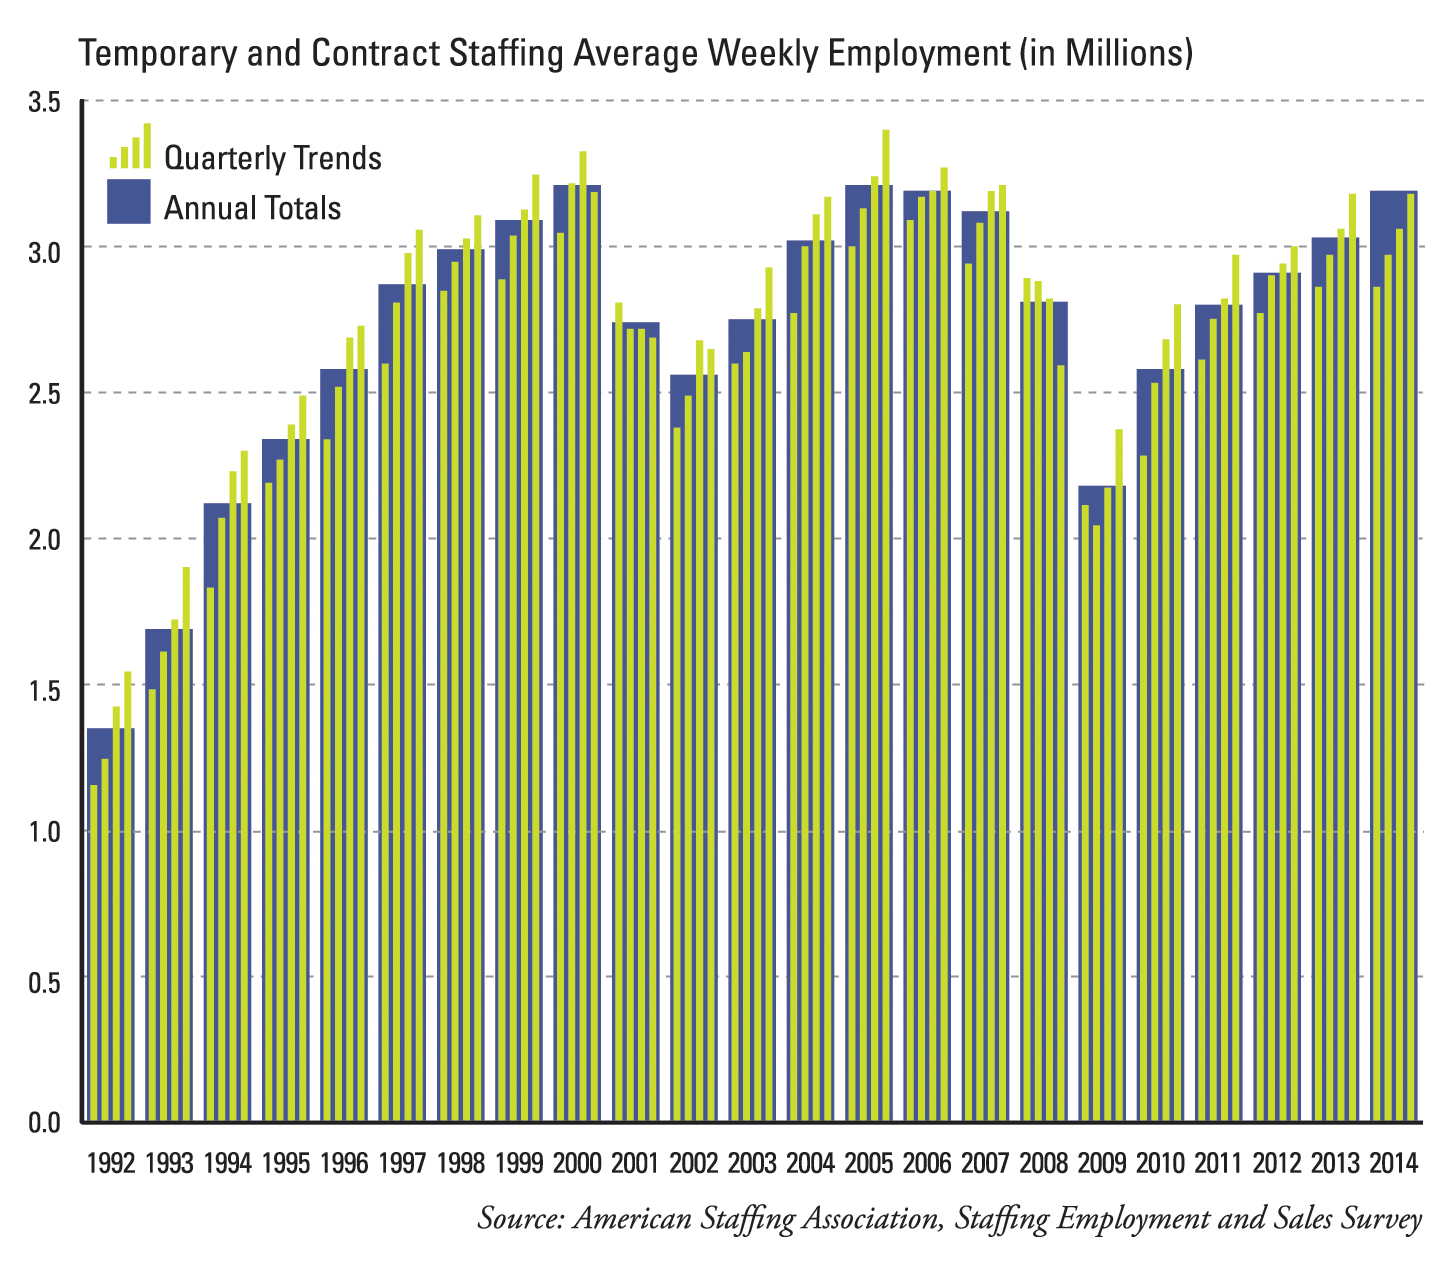 Temporary and Contract Staffing Average Weekly Employment